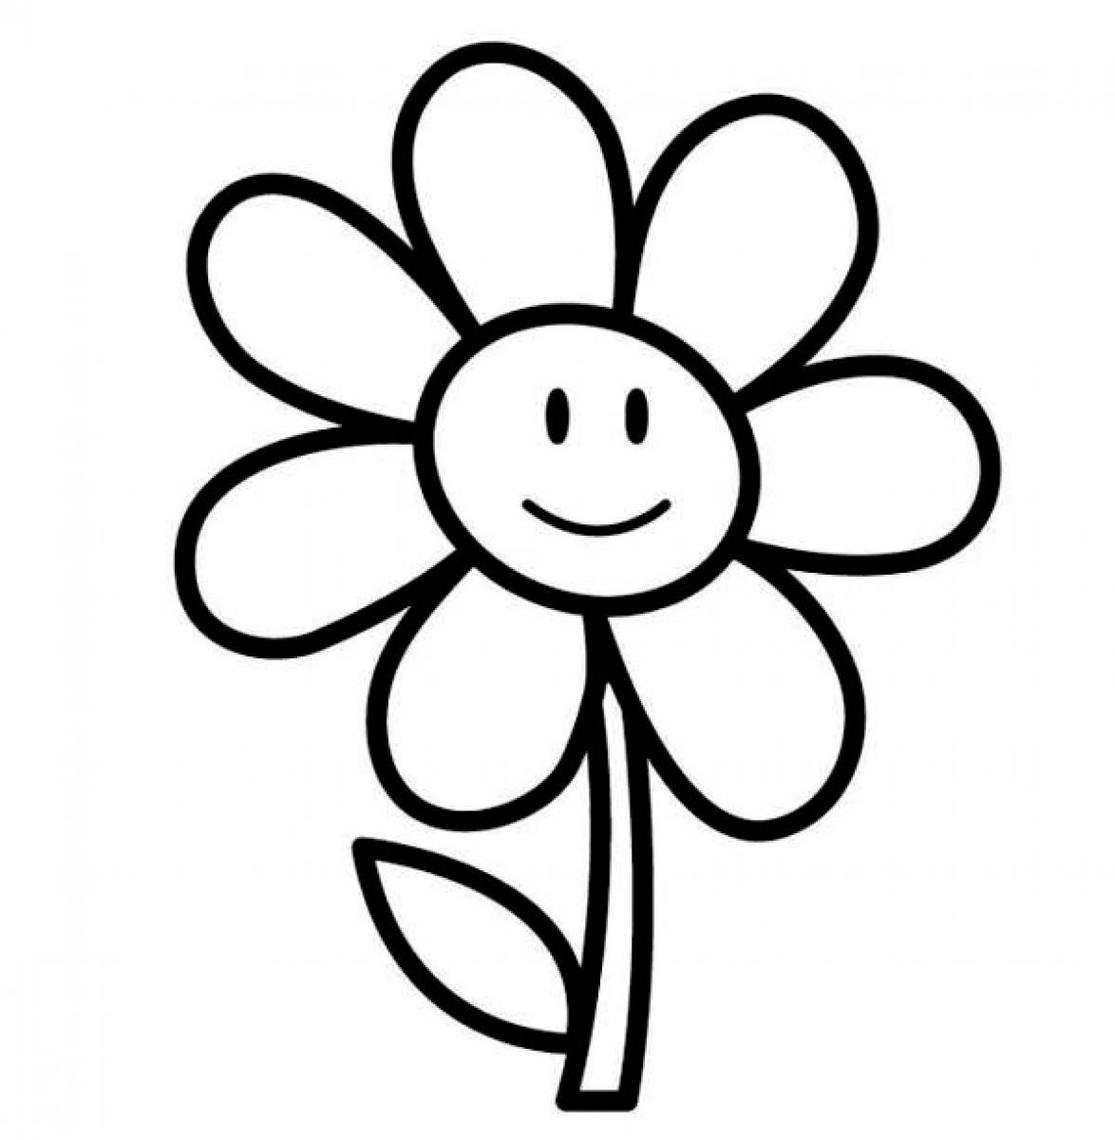 Black And White Flower Images Clipart Free download best Black 